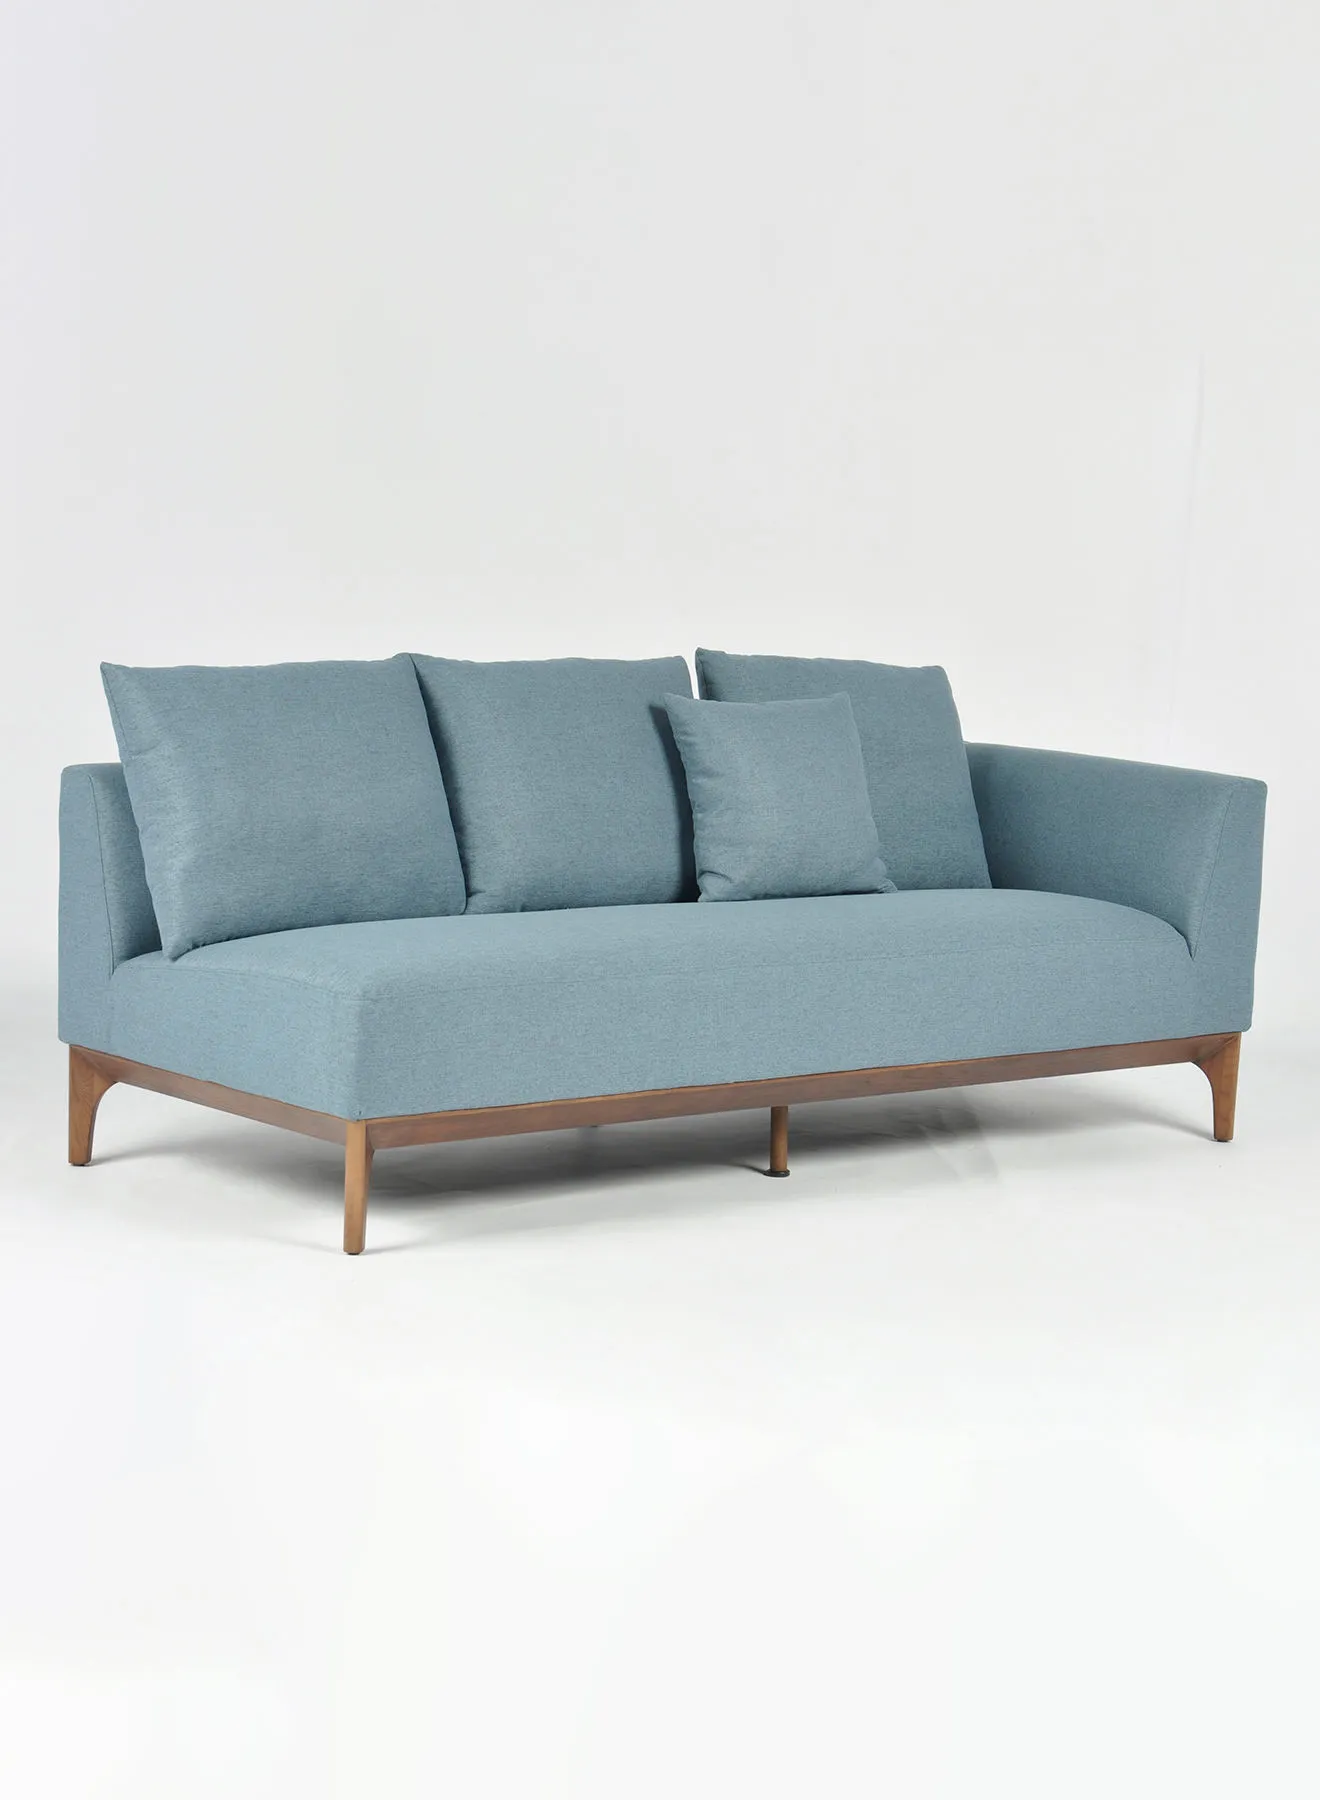 Switch Sofa - Upholstered Fabric Blue Wood Couch - 198 X 88 X 80 - 2 Seater Sofa Relaxing Sofa